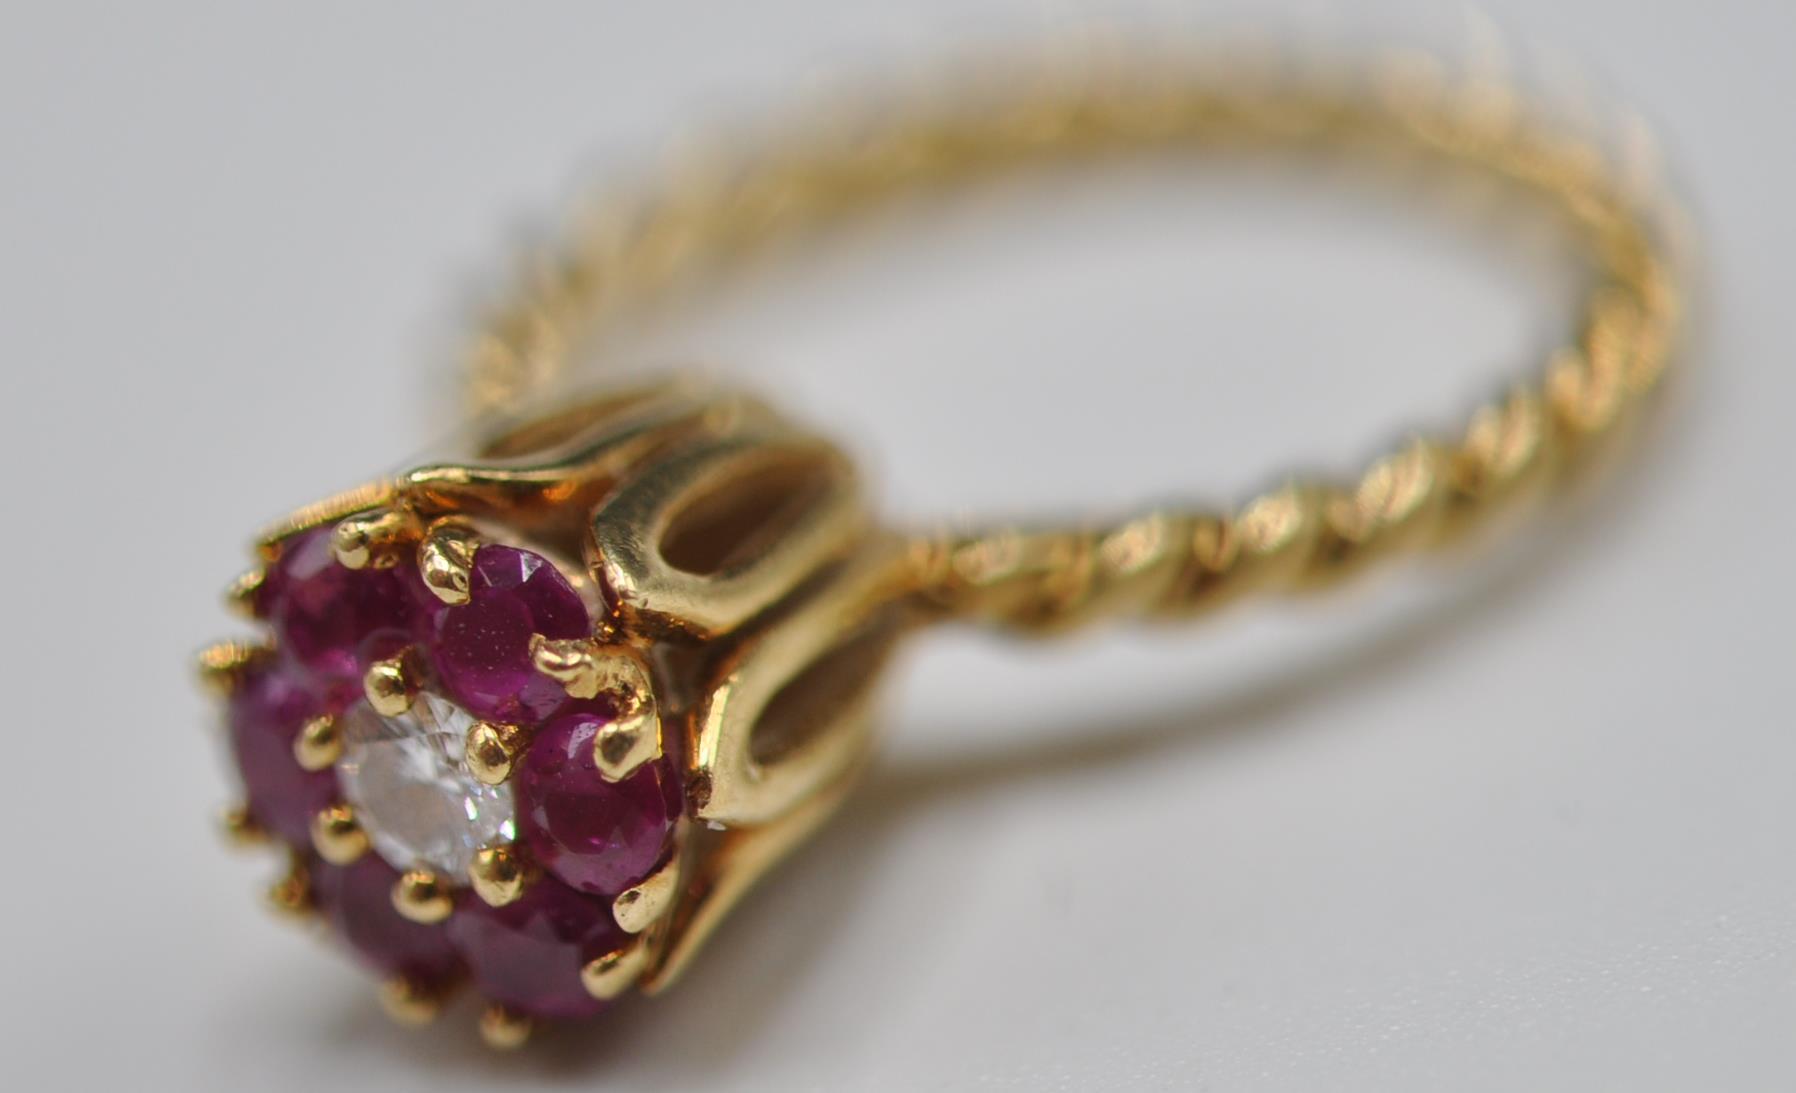 STAMPED 14CT GOLD RING WITH DIAMONDS AND RUBIES